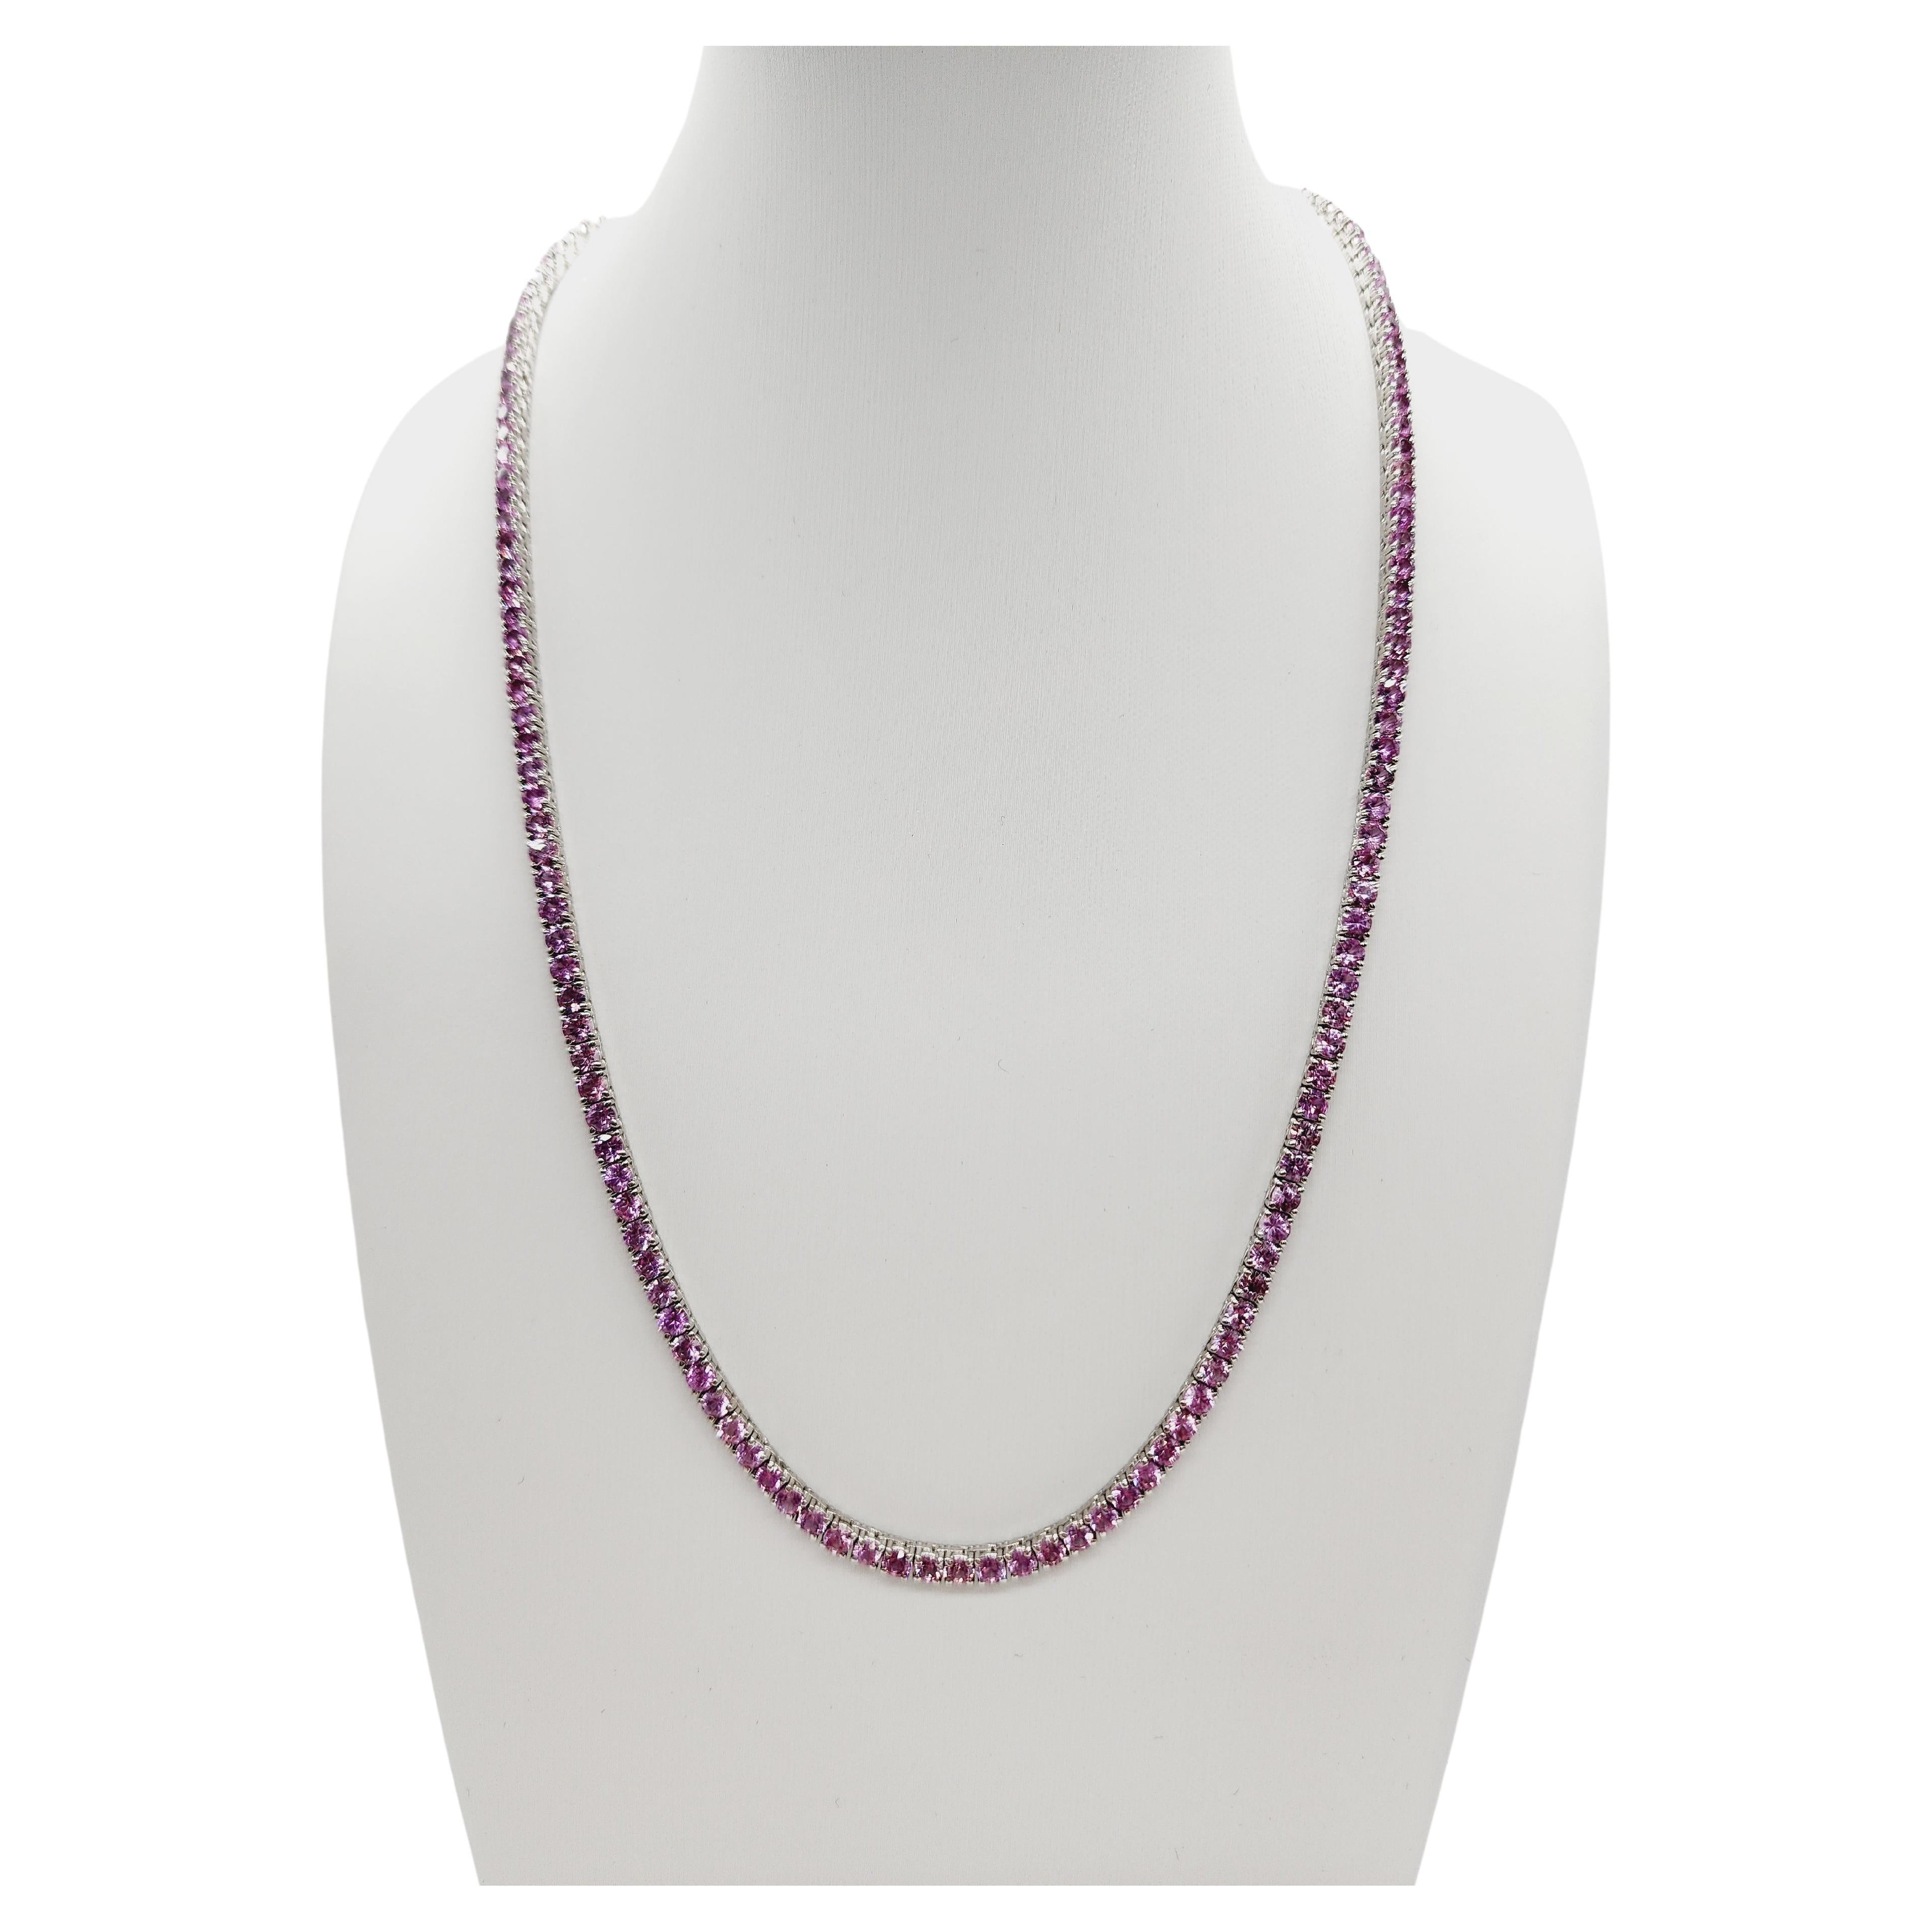 NATURAL PINK SAPPHIRE TENNIS NECKLACE WHITE GOLD 14K
18 INCH. 3.2MM WIDE.

All sapphire are natural, not treated.

*Free shipping within the U.S.*